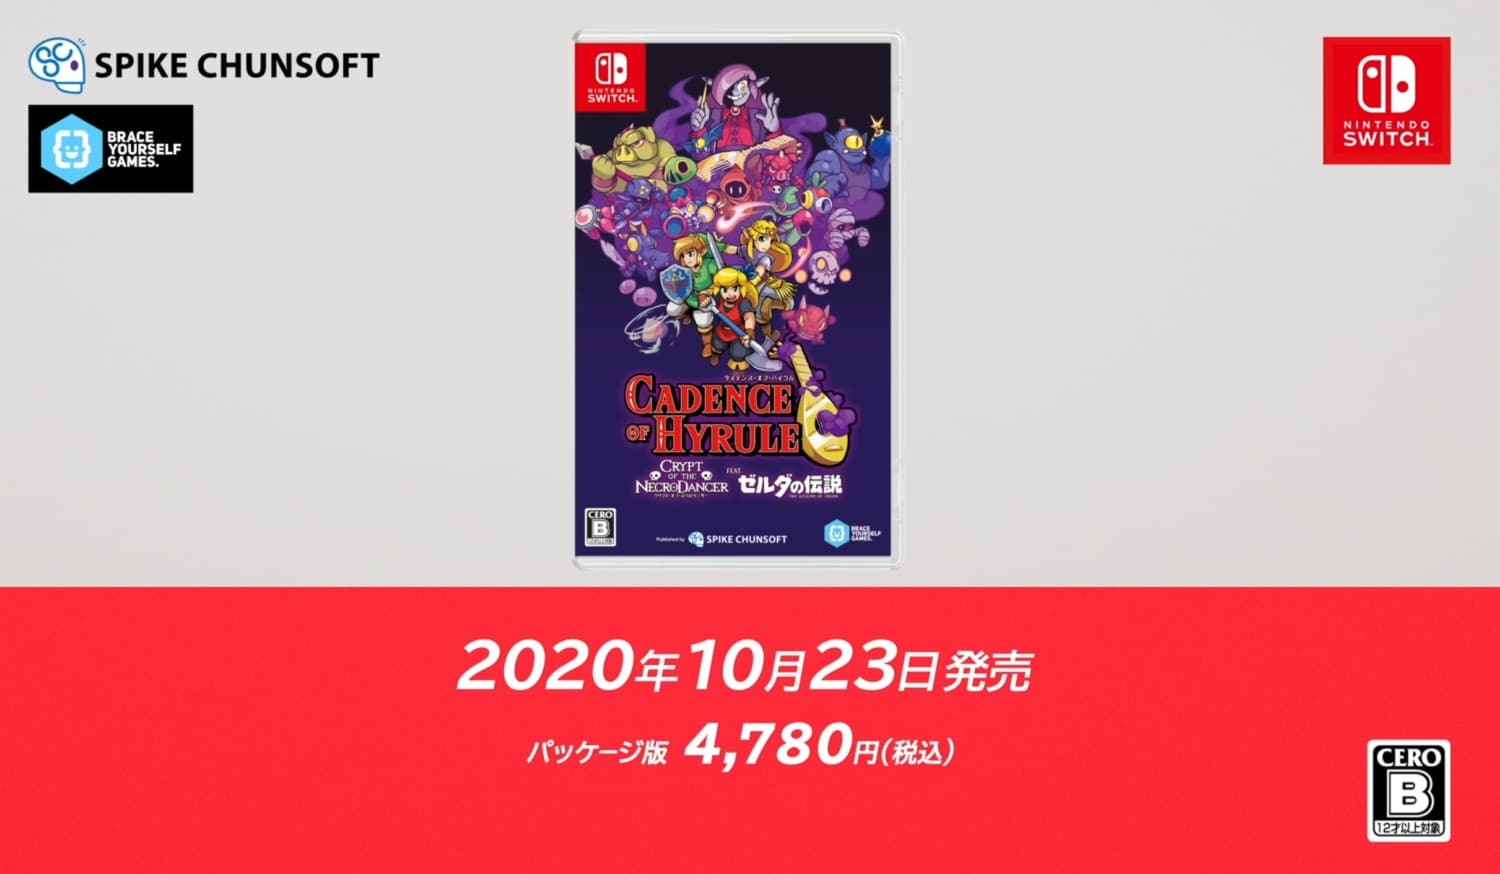 free download cadence of hyrule release date